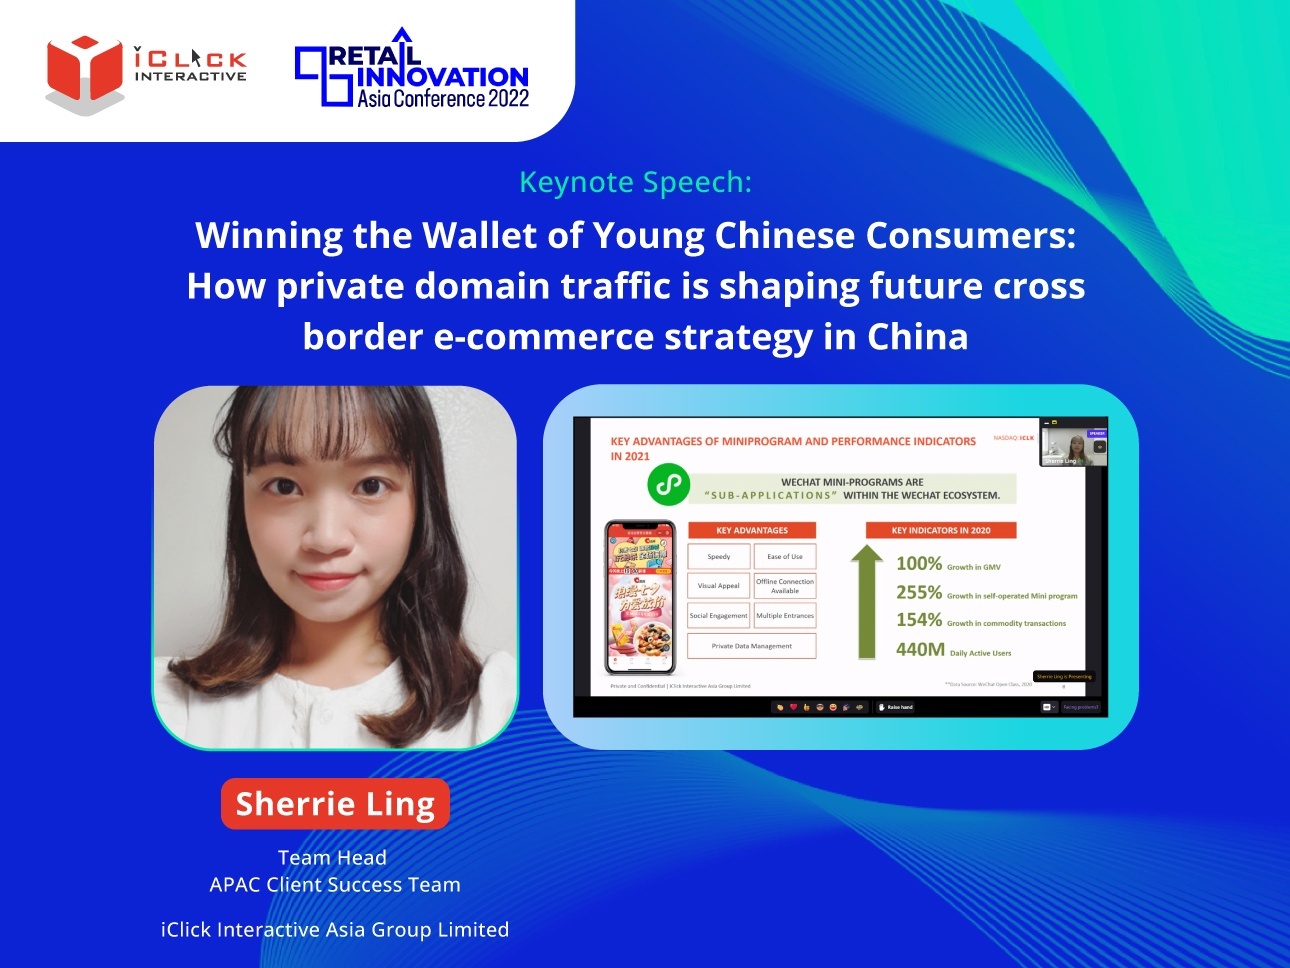 [Retail Innovations Asia Conference 2022] How Private Domain Traffic is Shaping future Cross-border E-Commerce Strategy in China?